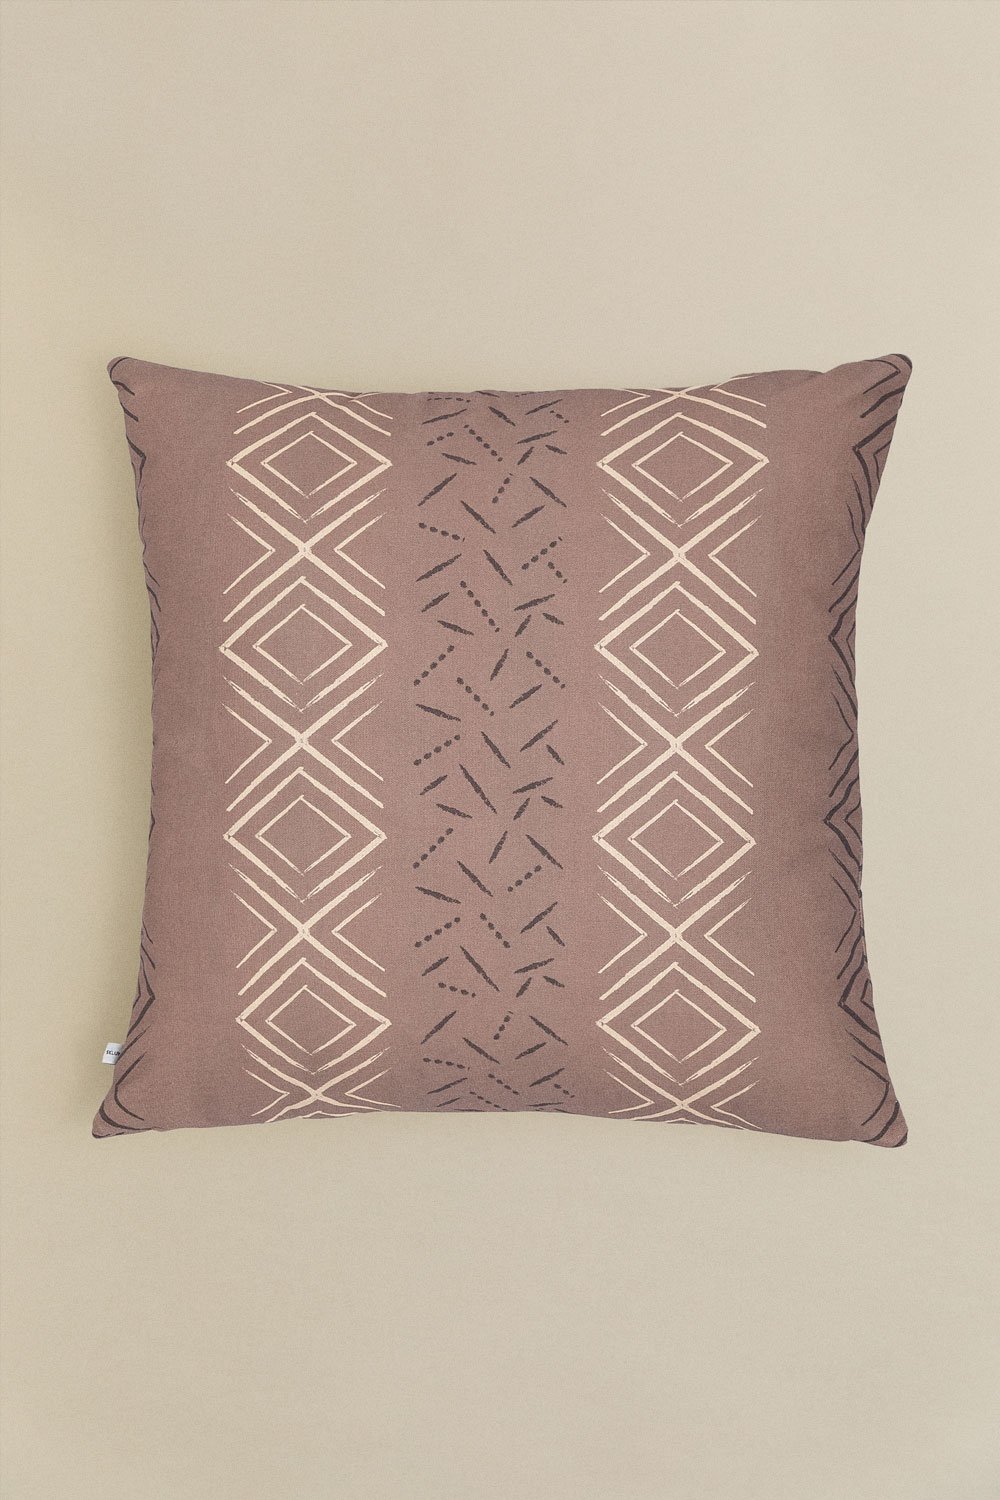 Square Cotton Cushion Cover (60x60cm) Tadjou Style, gallery image 1